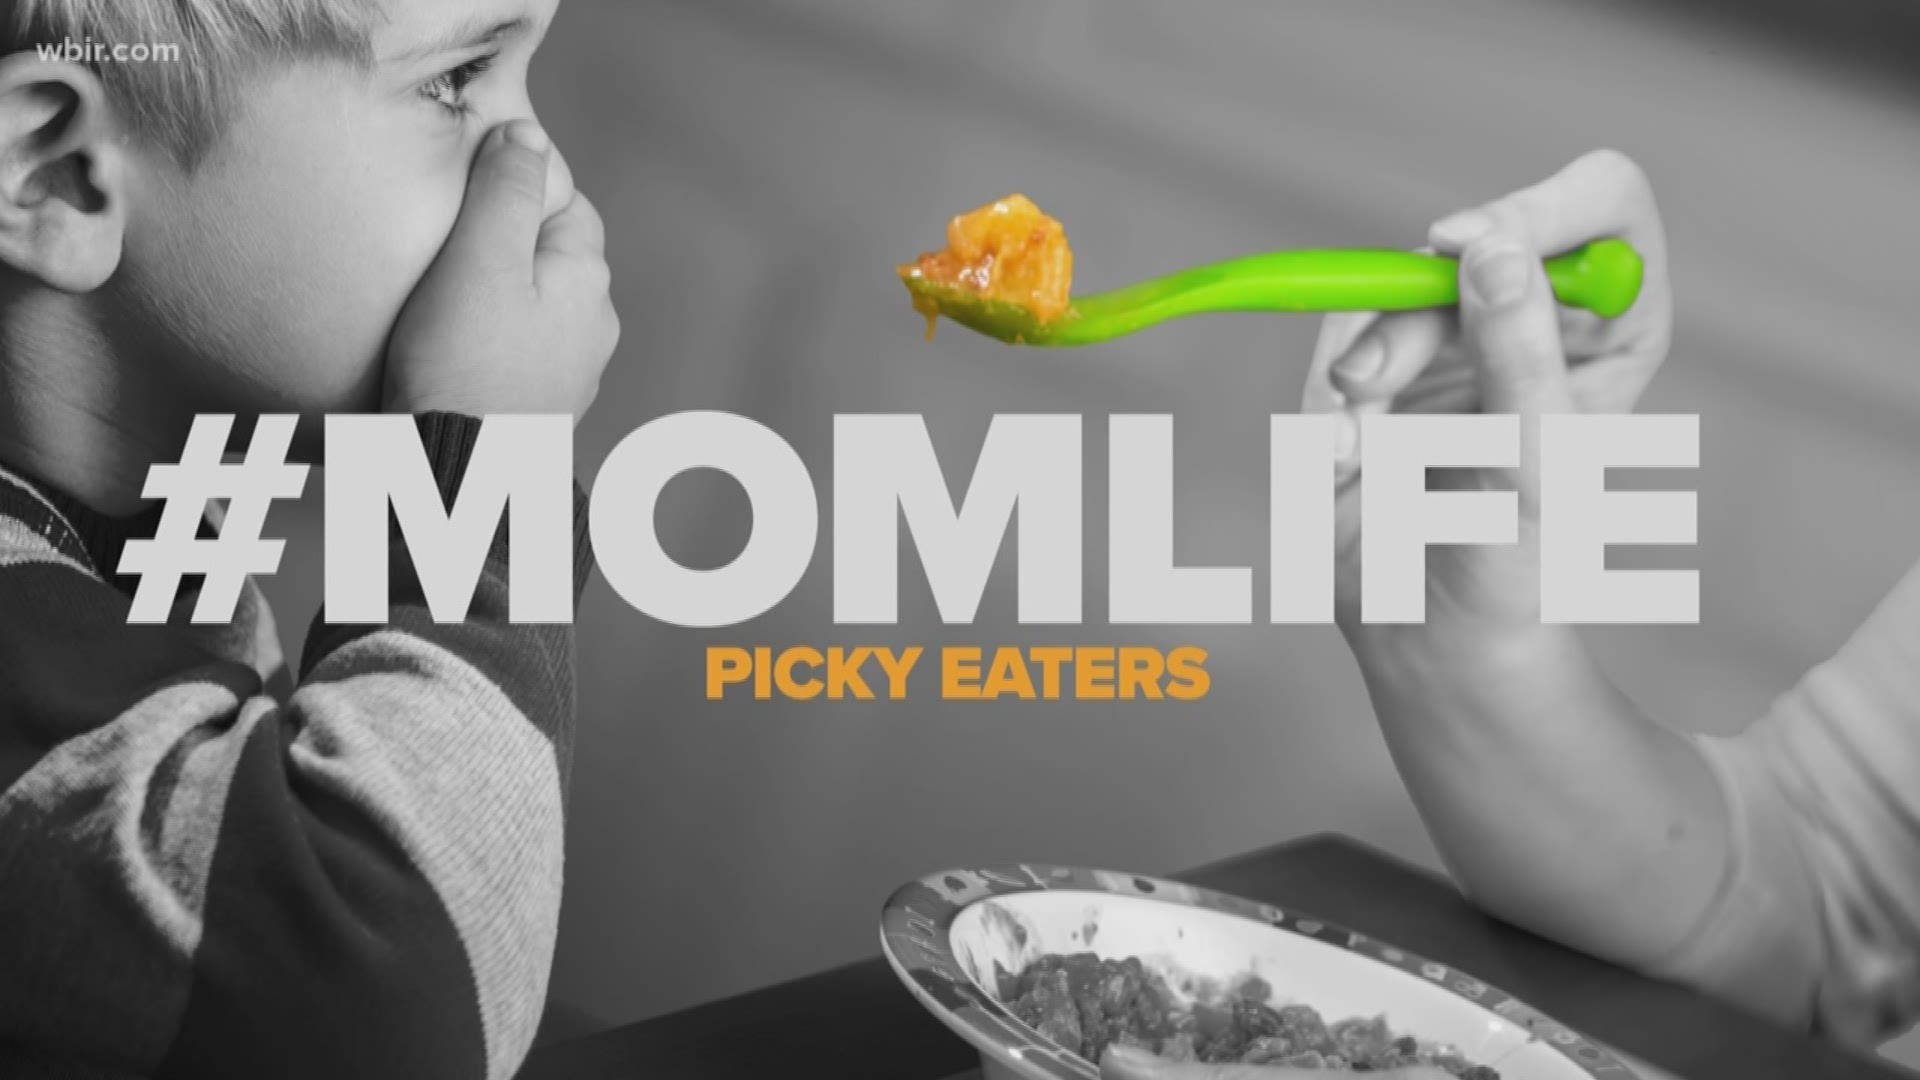 It seems all parents face troubles with picky eaters at dinnertime!